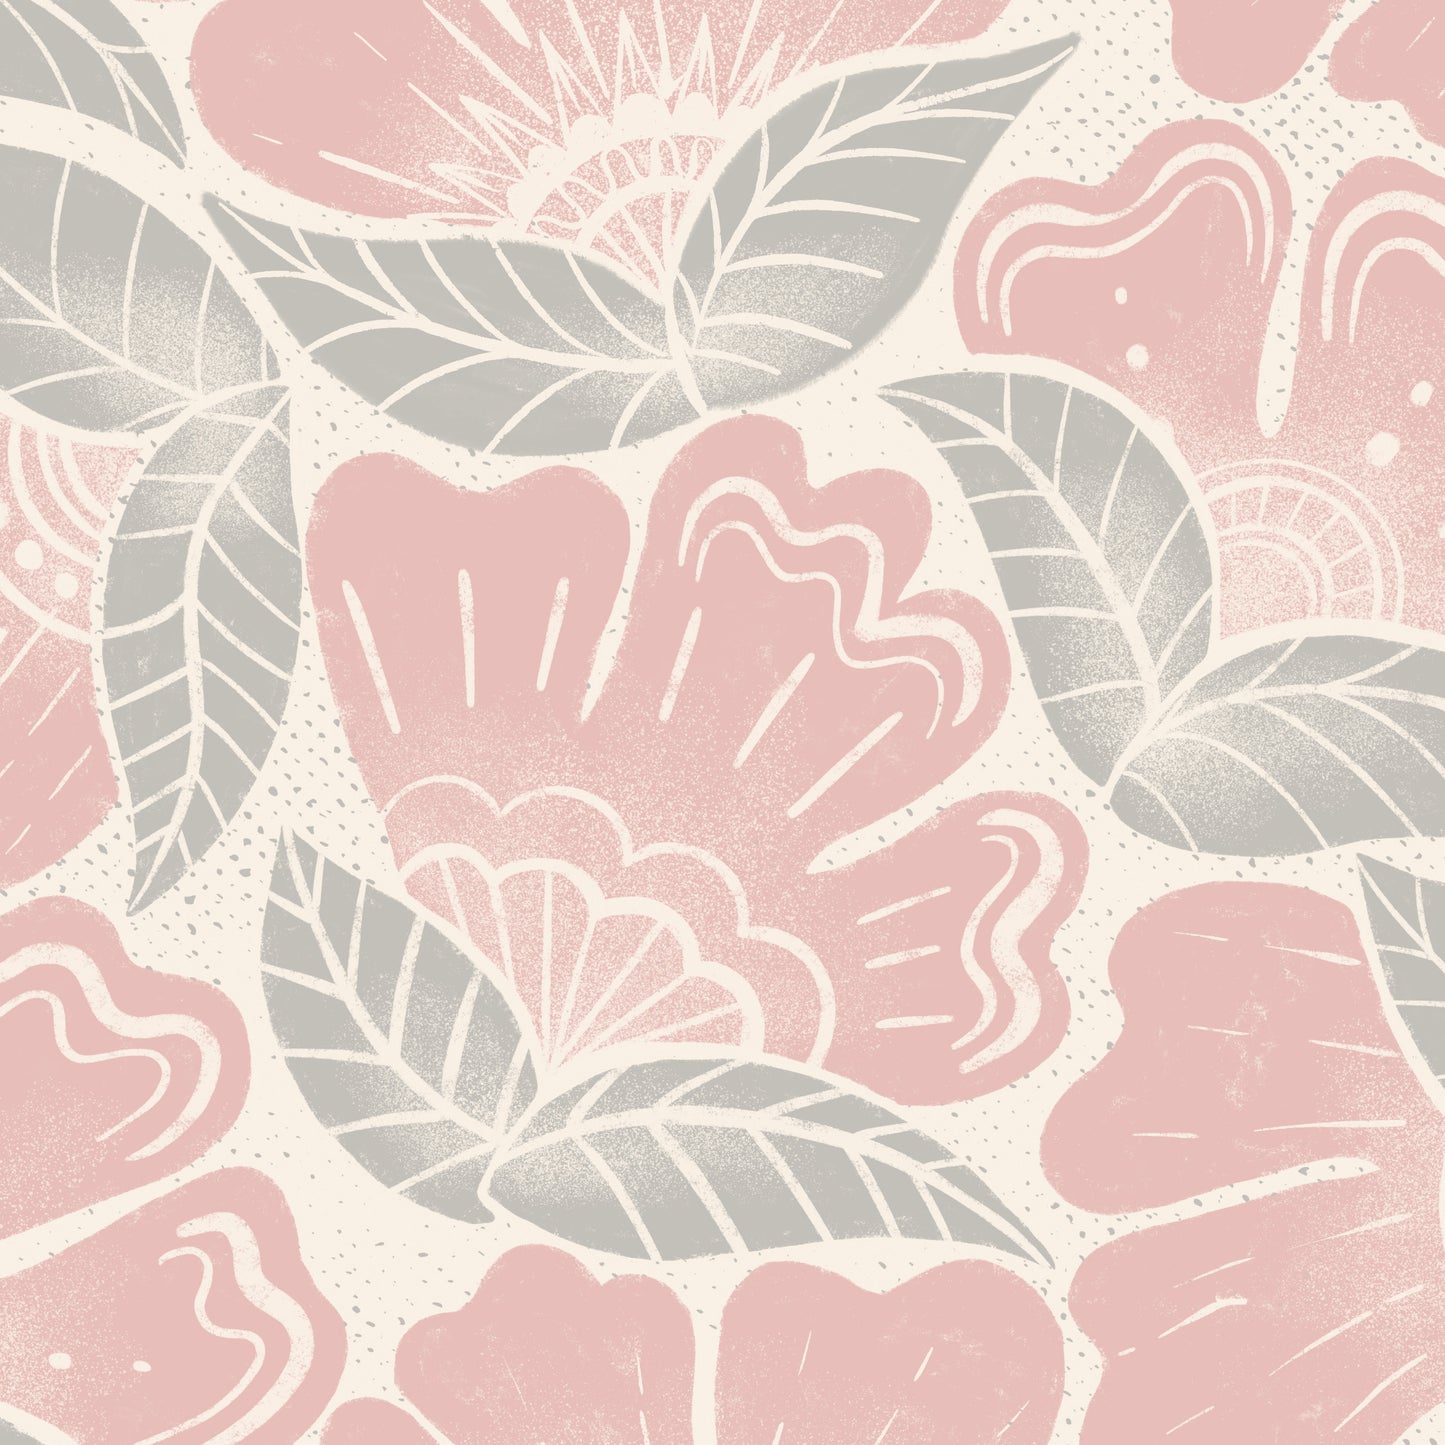 Scattered Flowers Wallpaper in Rosy Pink shown in a close up view.